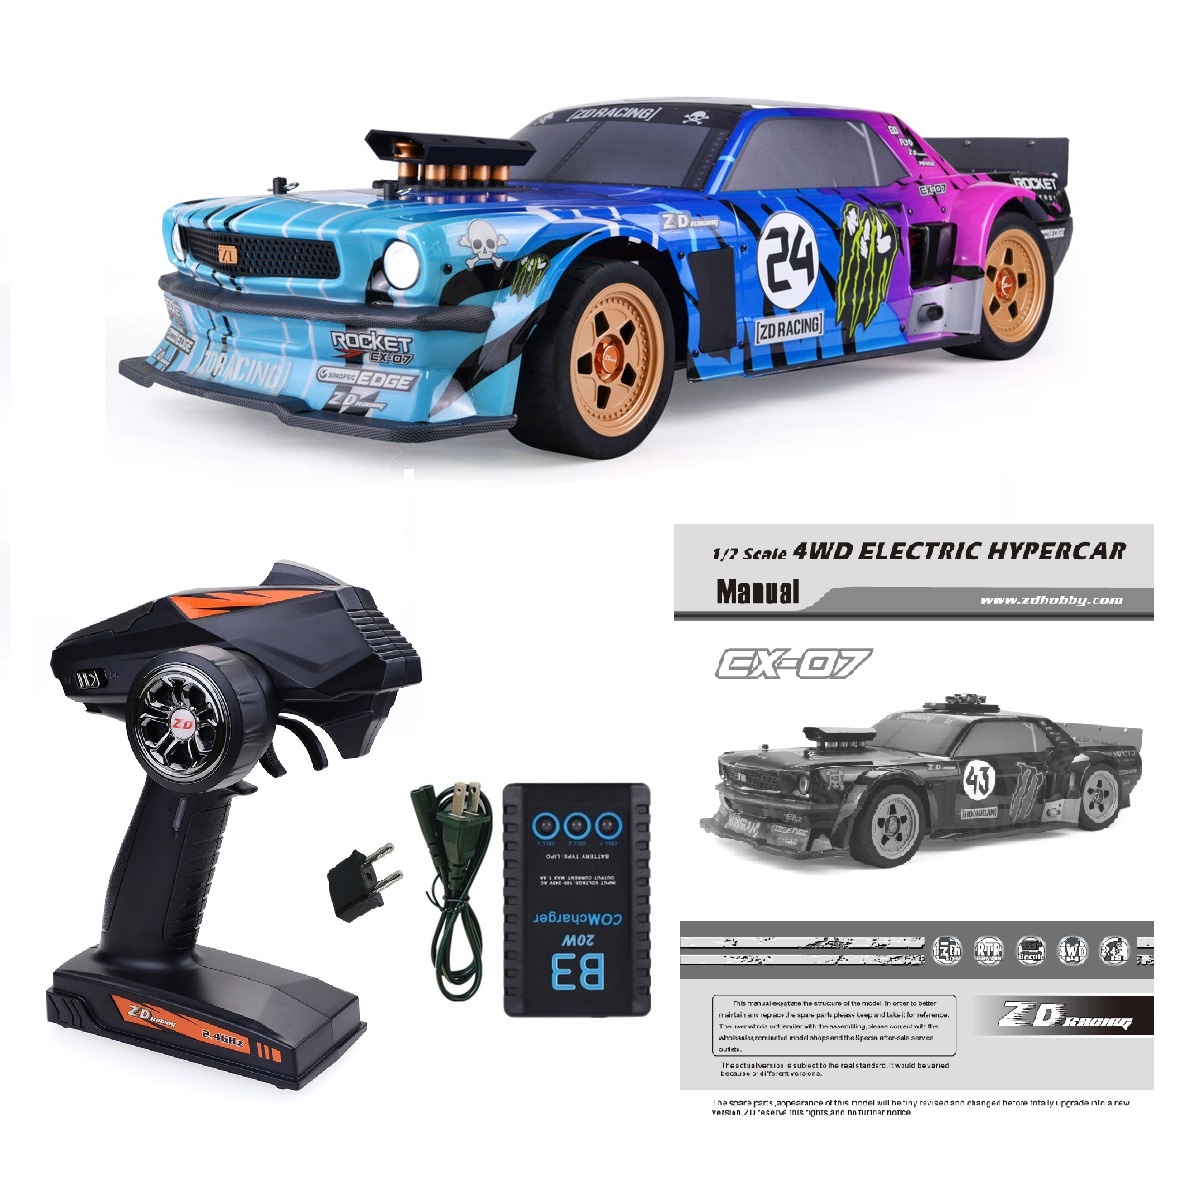 ZD Racing EX-07 1/7 SCALE 4WD ELECTRIC HYPERCAR